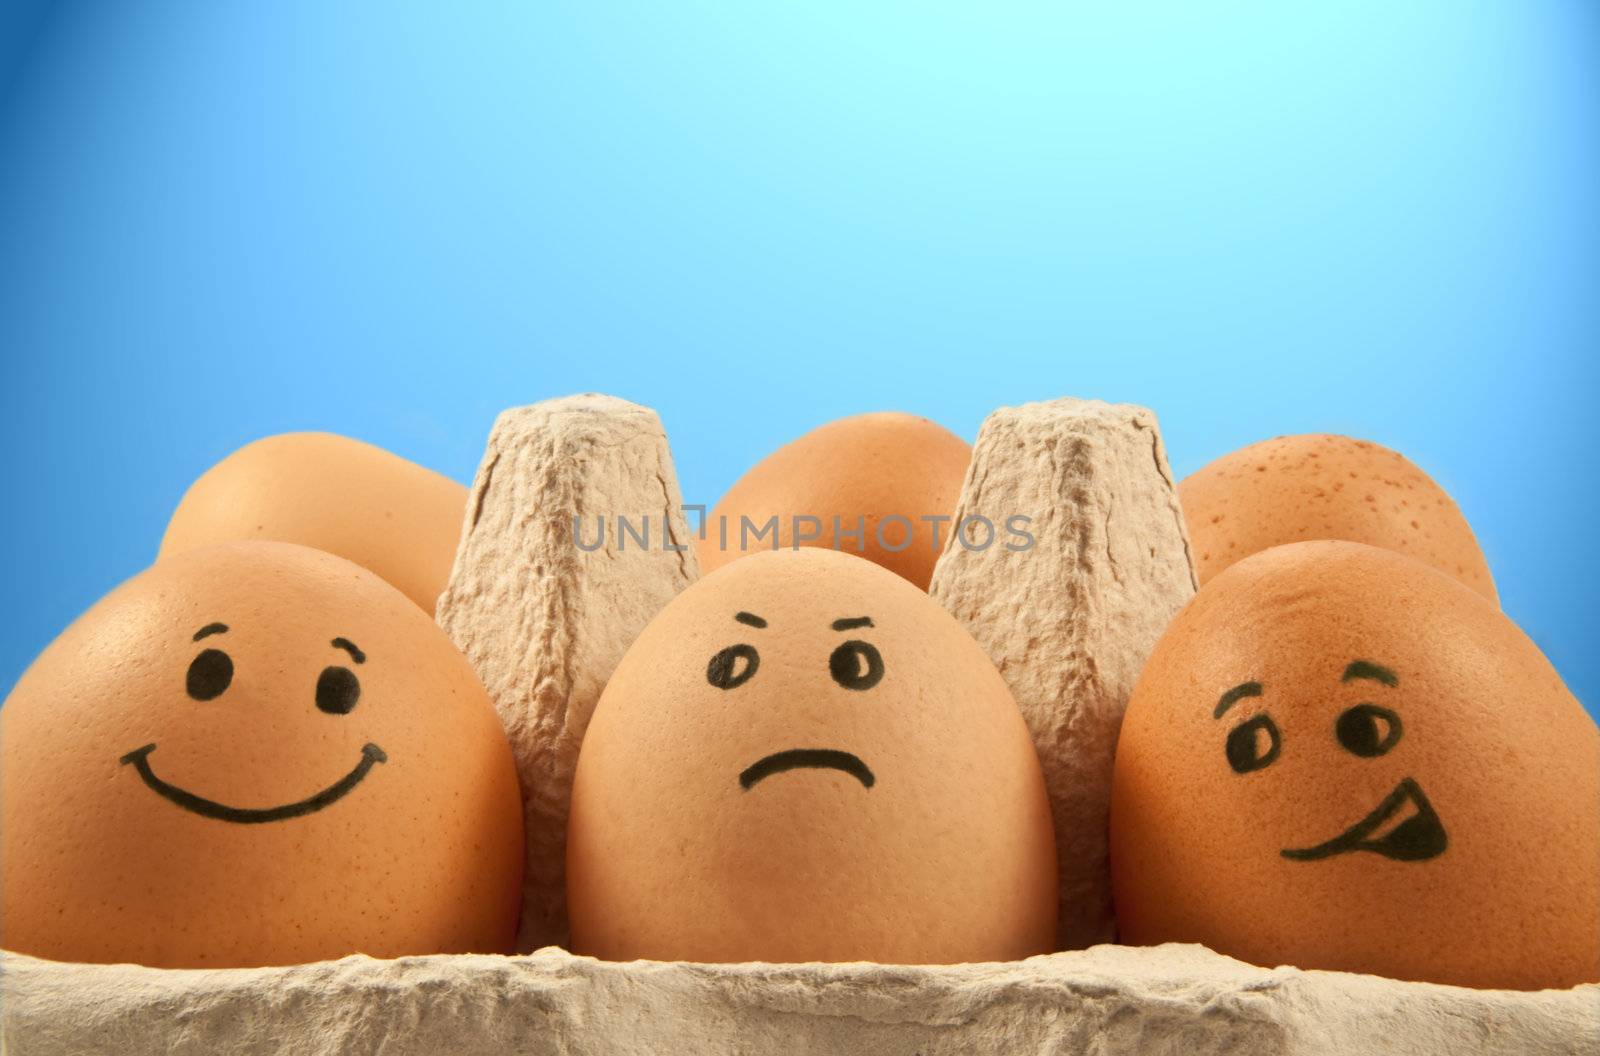 Close and low level of several brown eggs with painted faces against blue light effect background